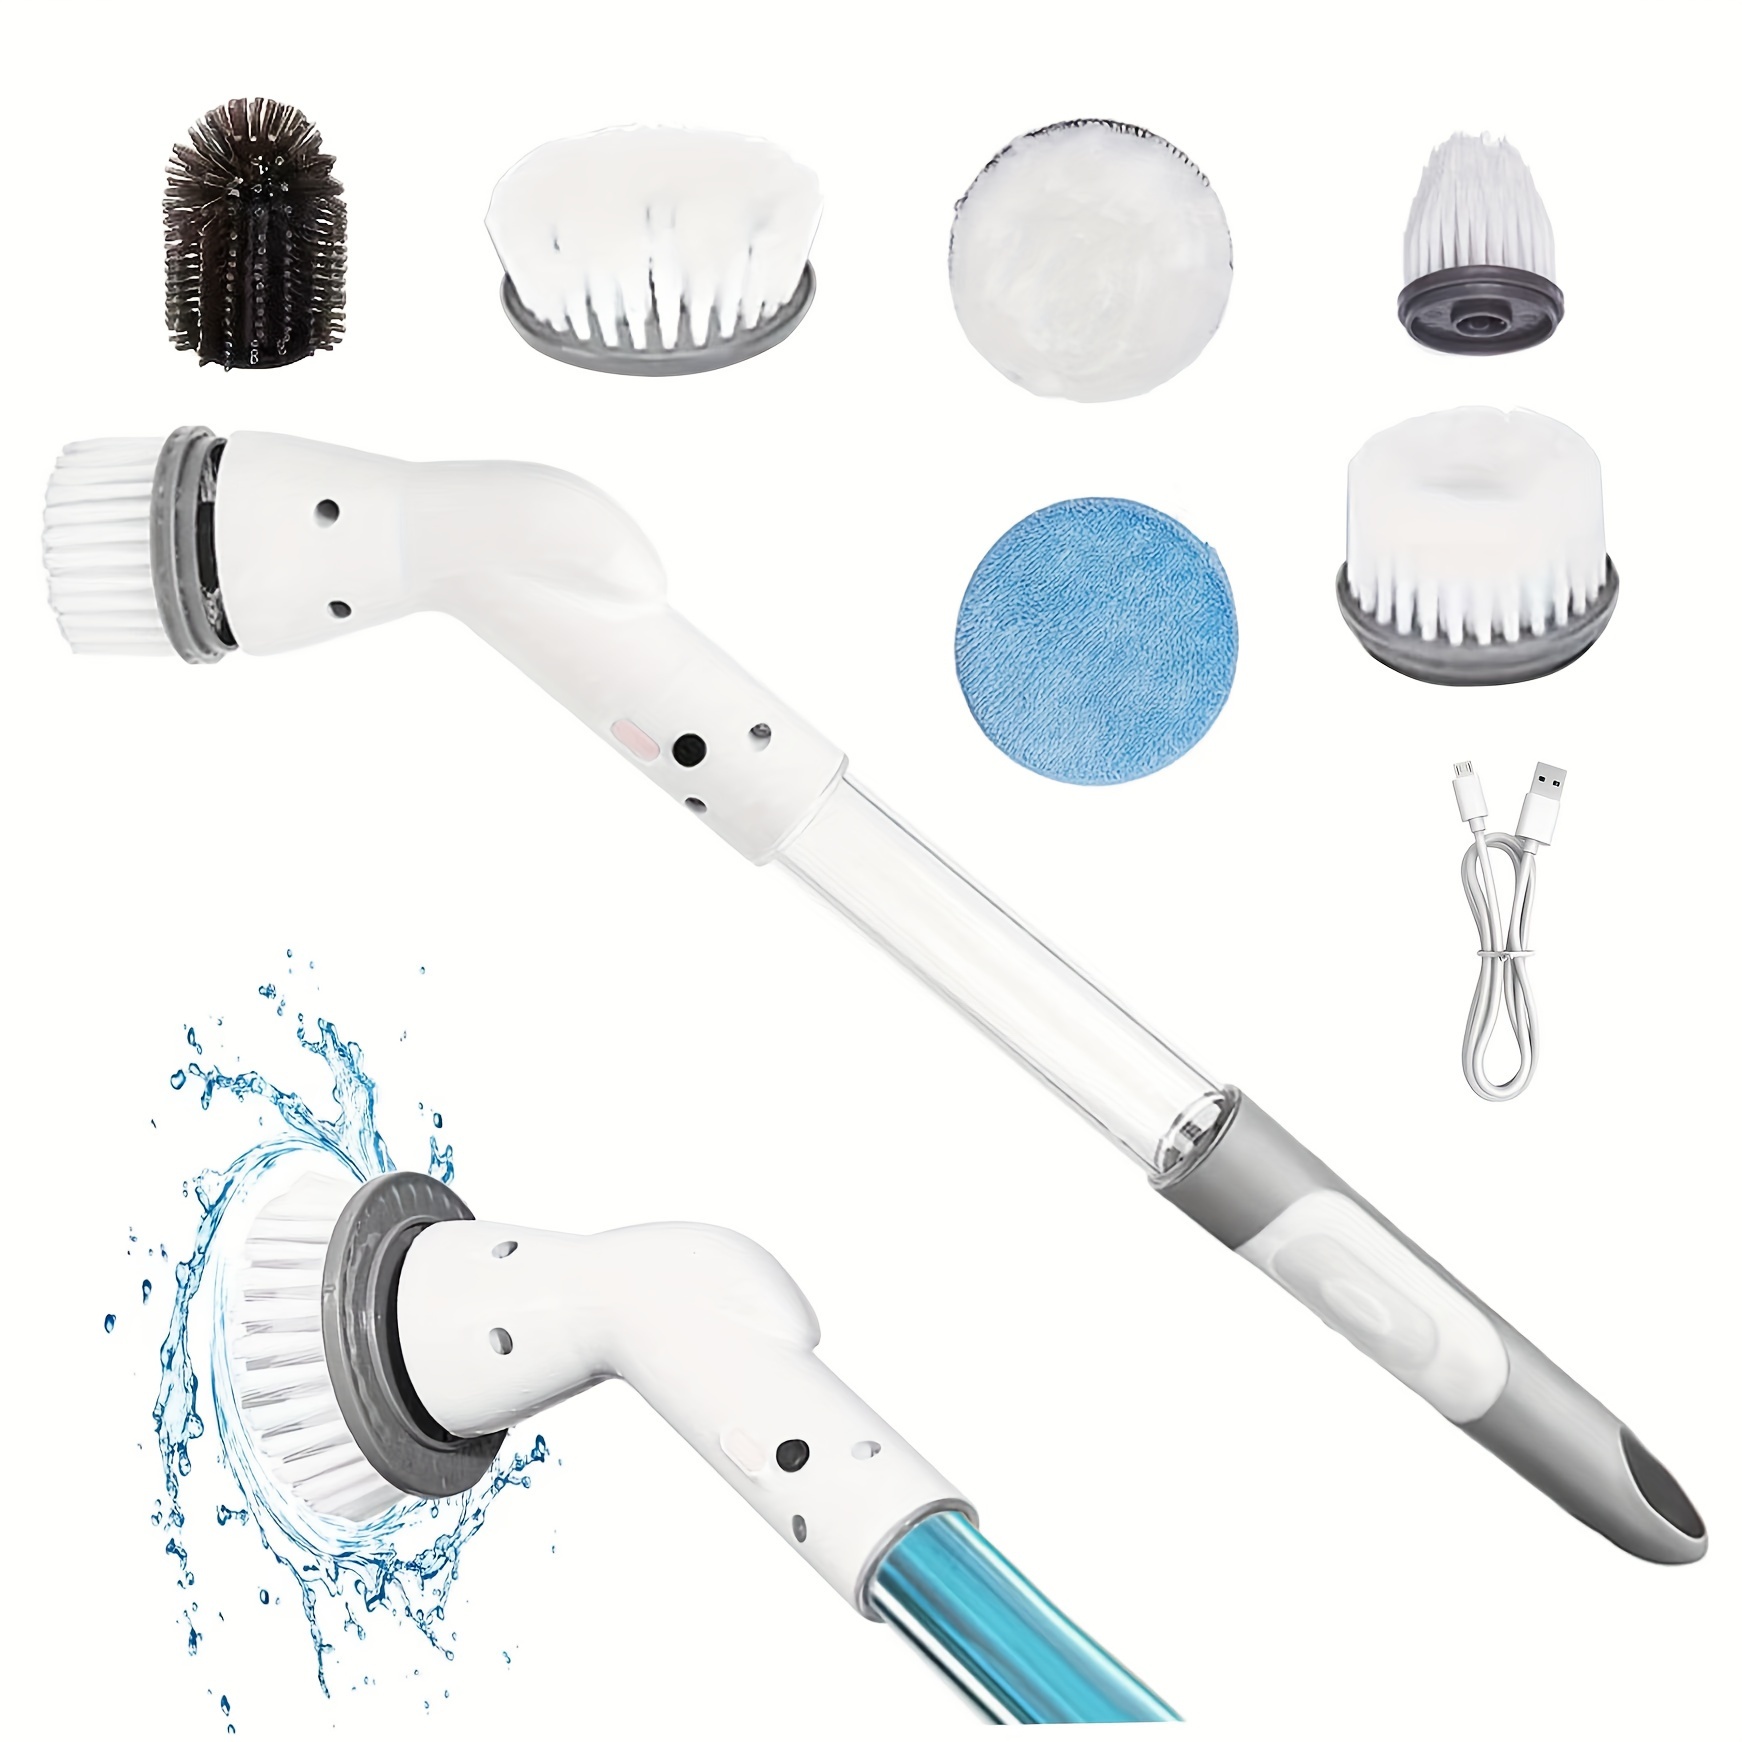 vuitte upgraded electric spin scrubber, cordless cleaning brush, 360 power shower  cleaning scrubber with 3 multi-purpose replaceable